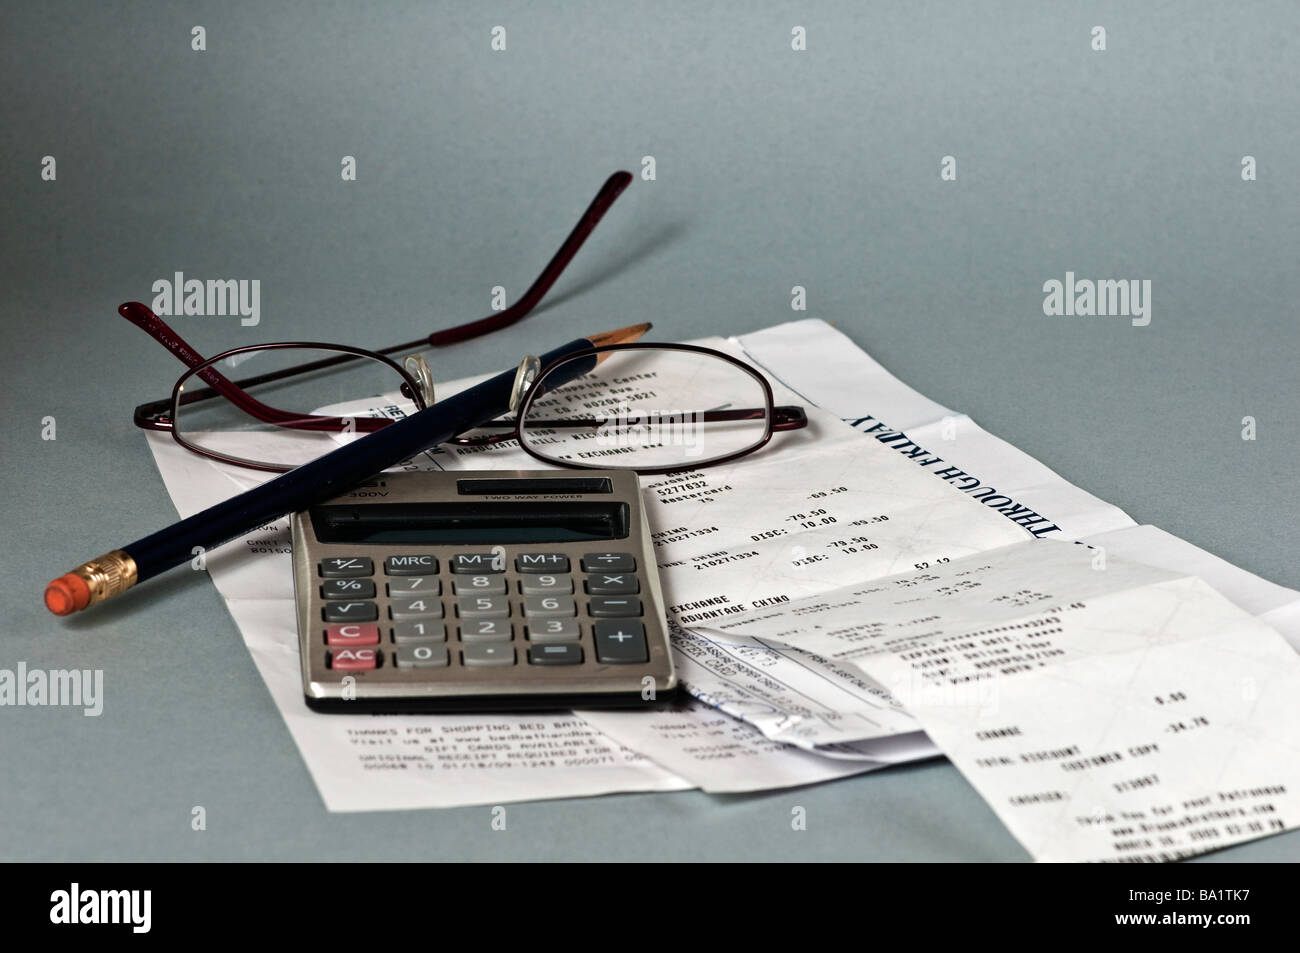 Calculator on top of receipts with pencil and reading glasses Stock Photo